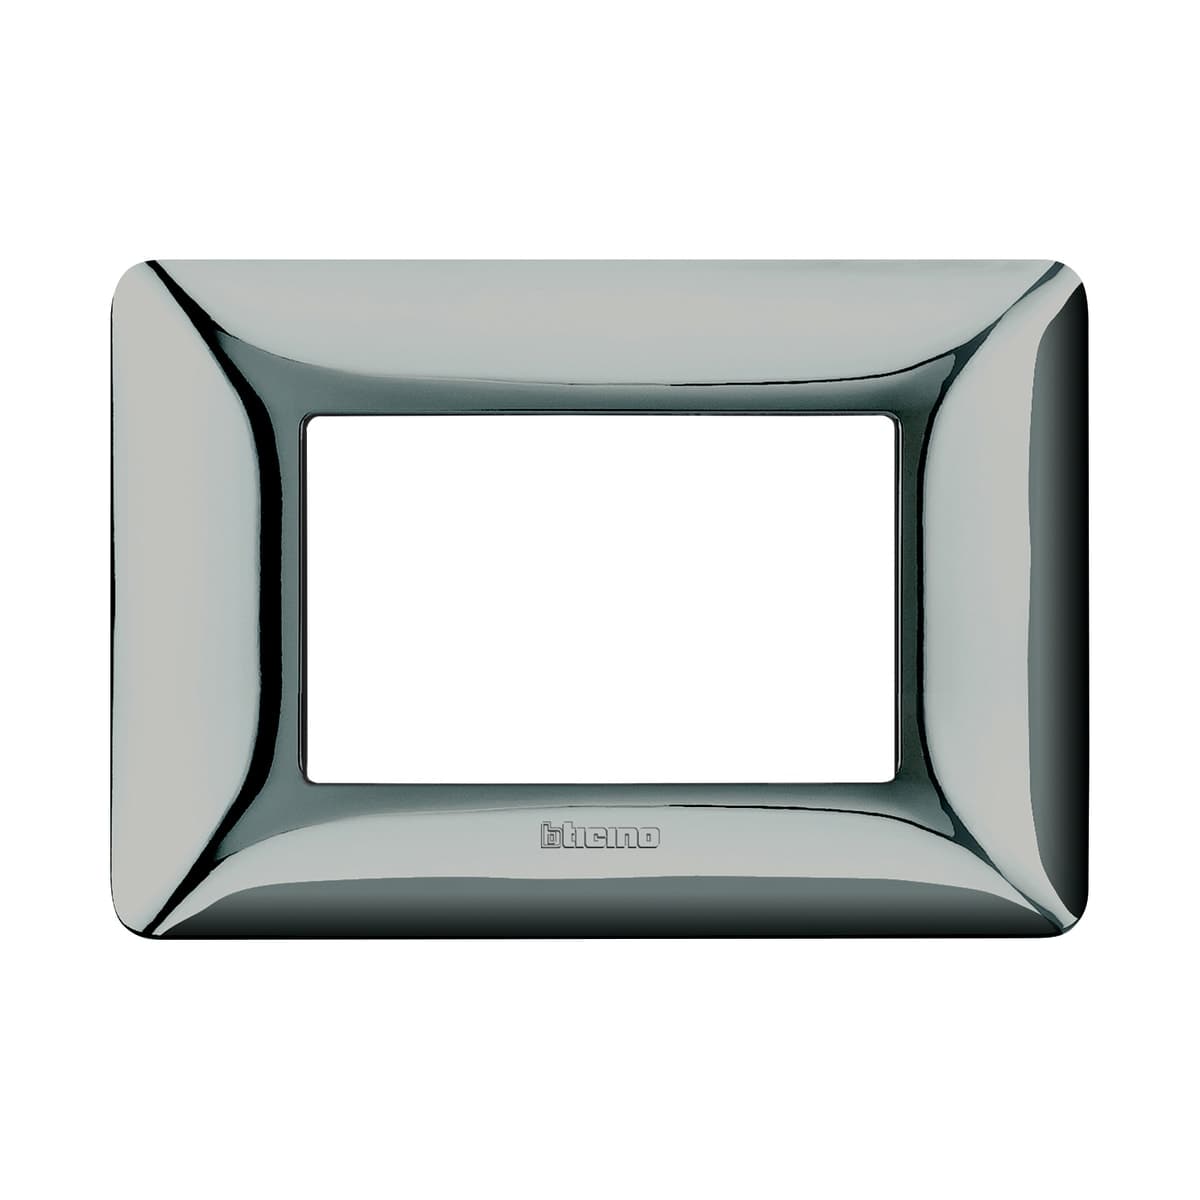 MATIX PLATE 3 PLACES POLISHED CHROME - best price from Maltashopper.com BR420100027